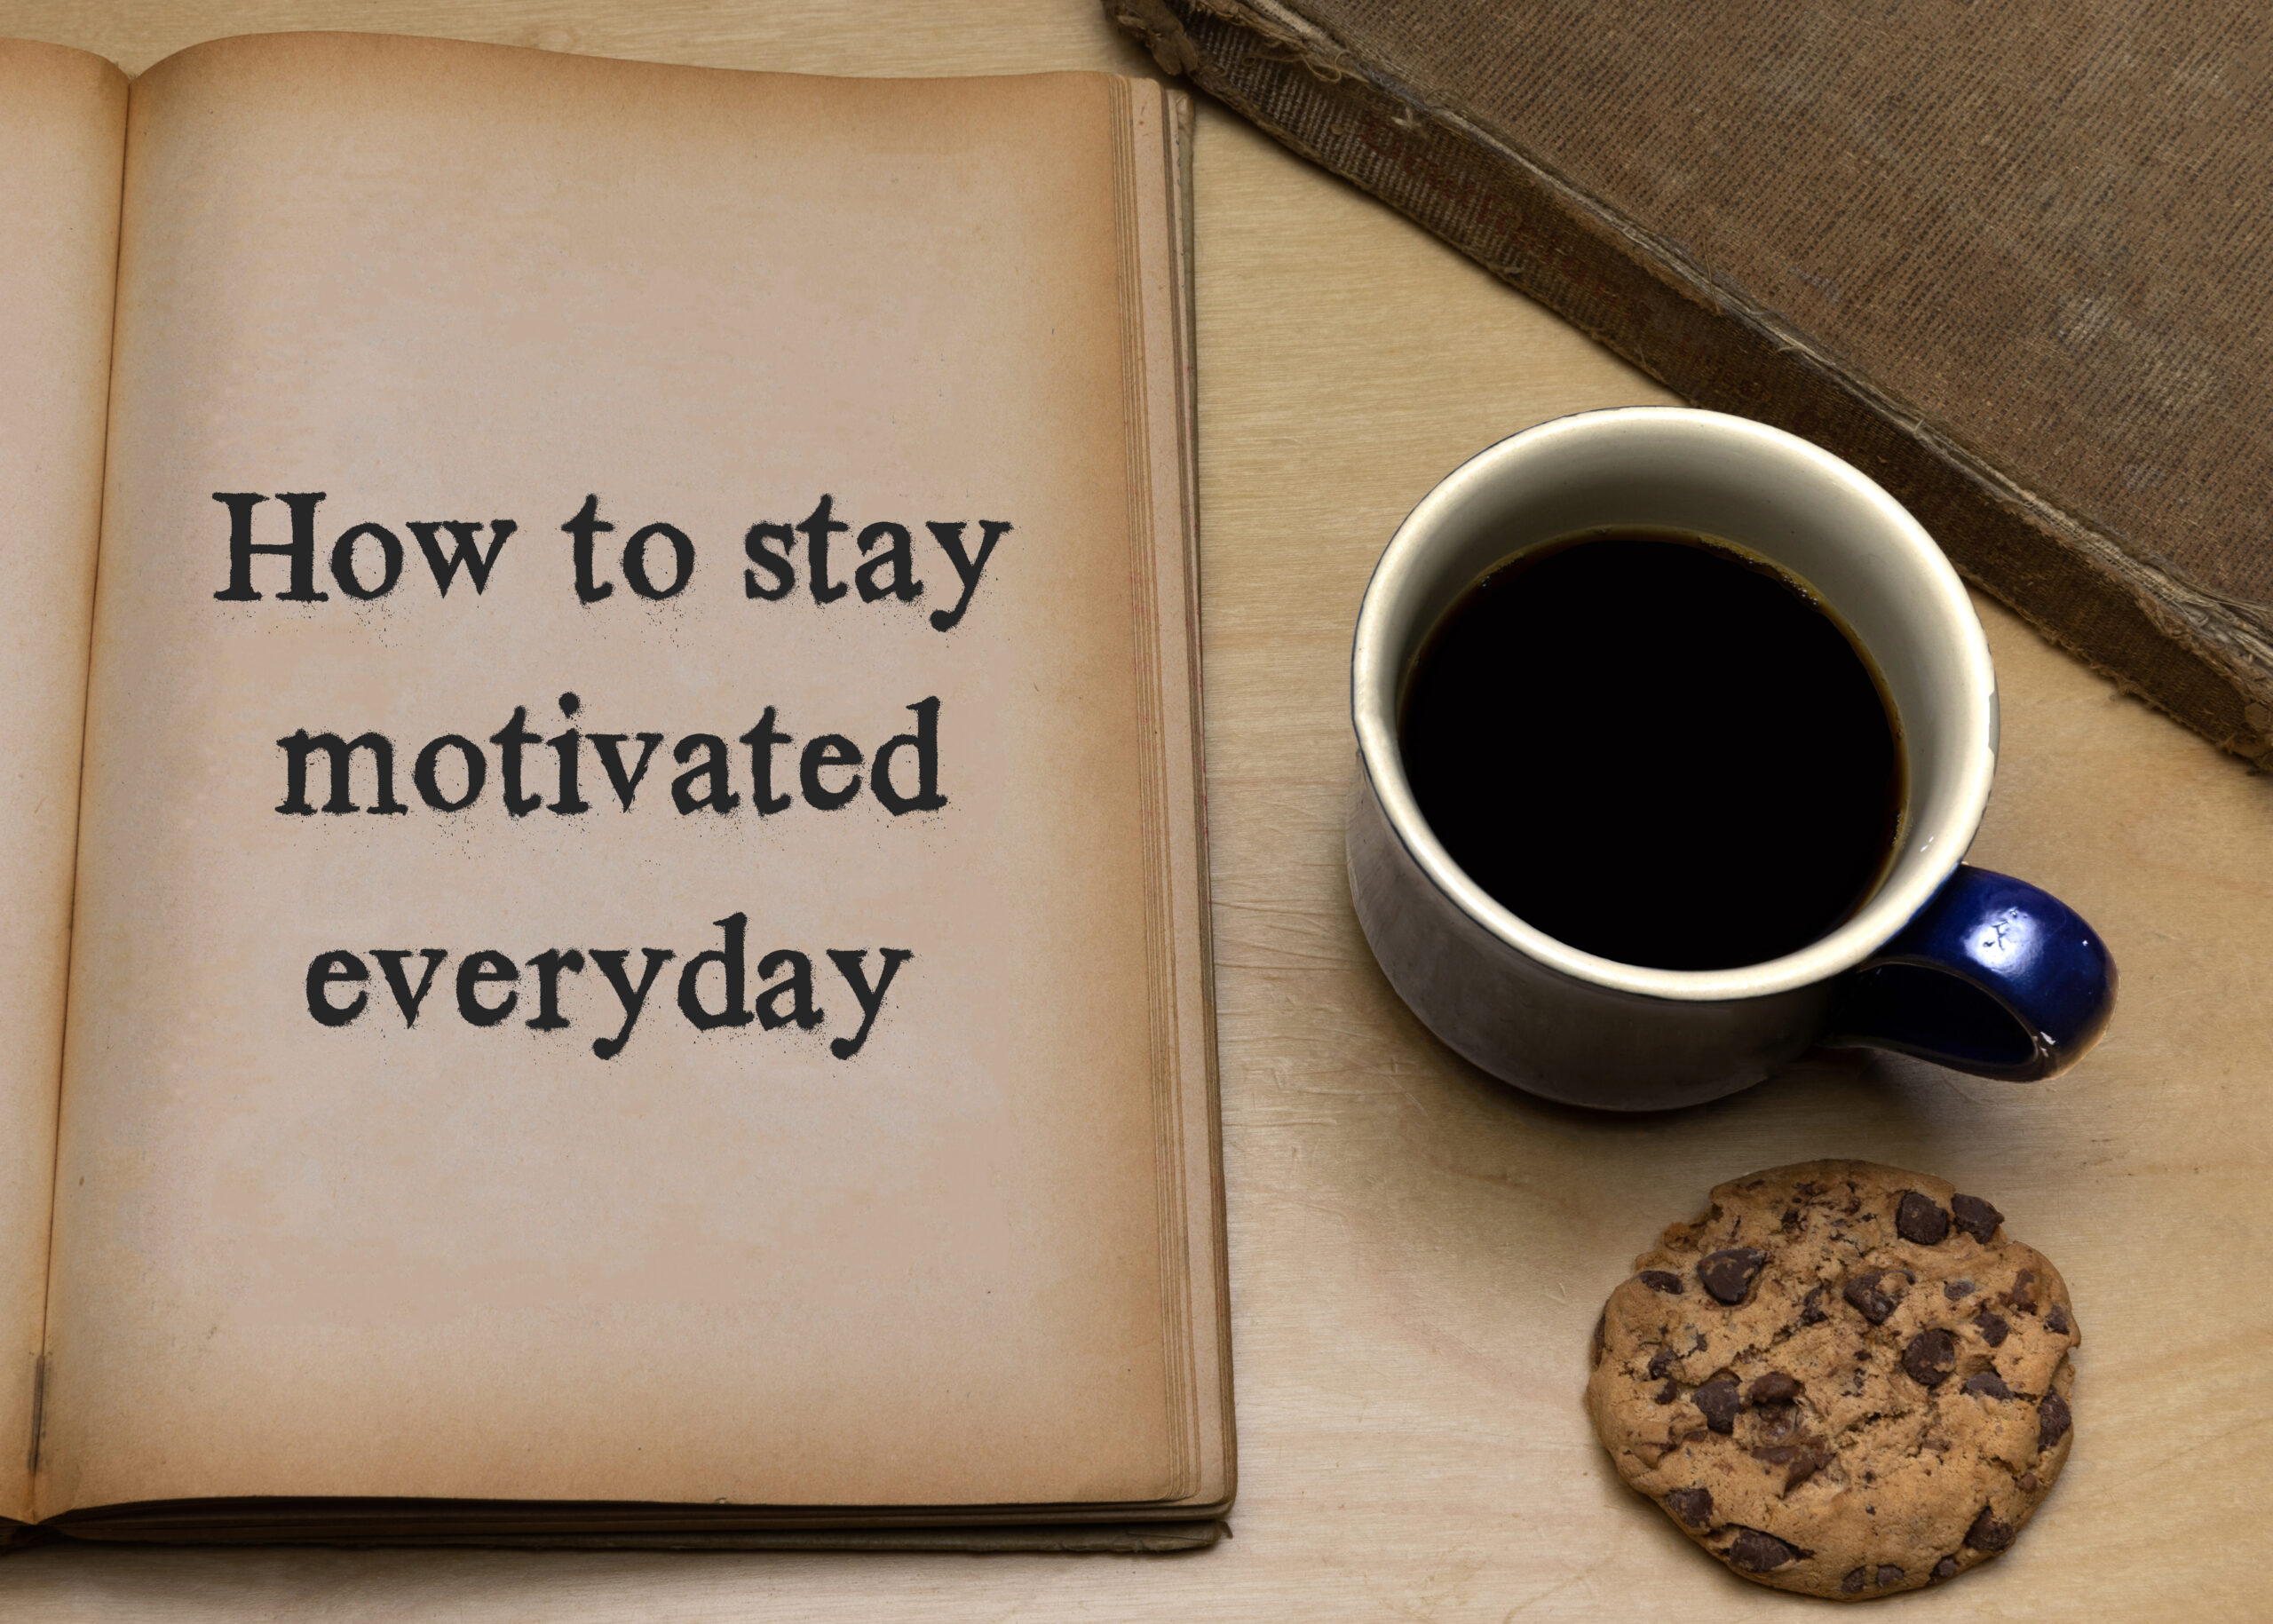 "How to stay motivated everyday" written on a notebook page. A cup of coffee and a chocolate chip cookie are next to the notebook.